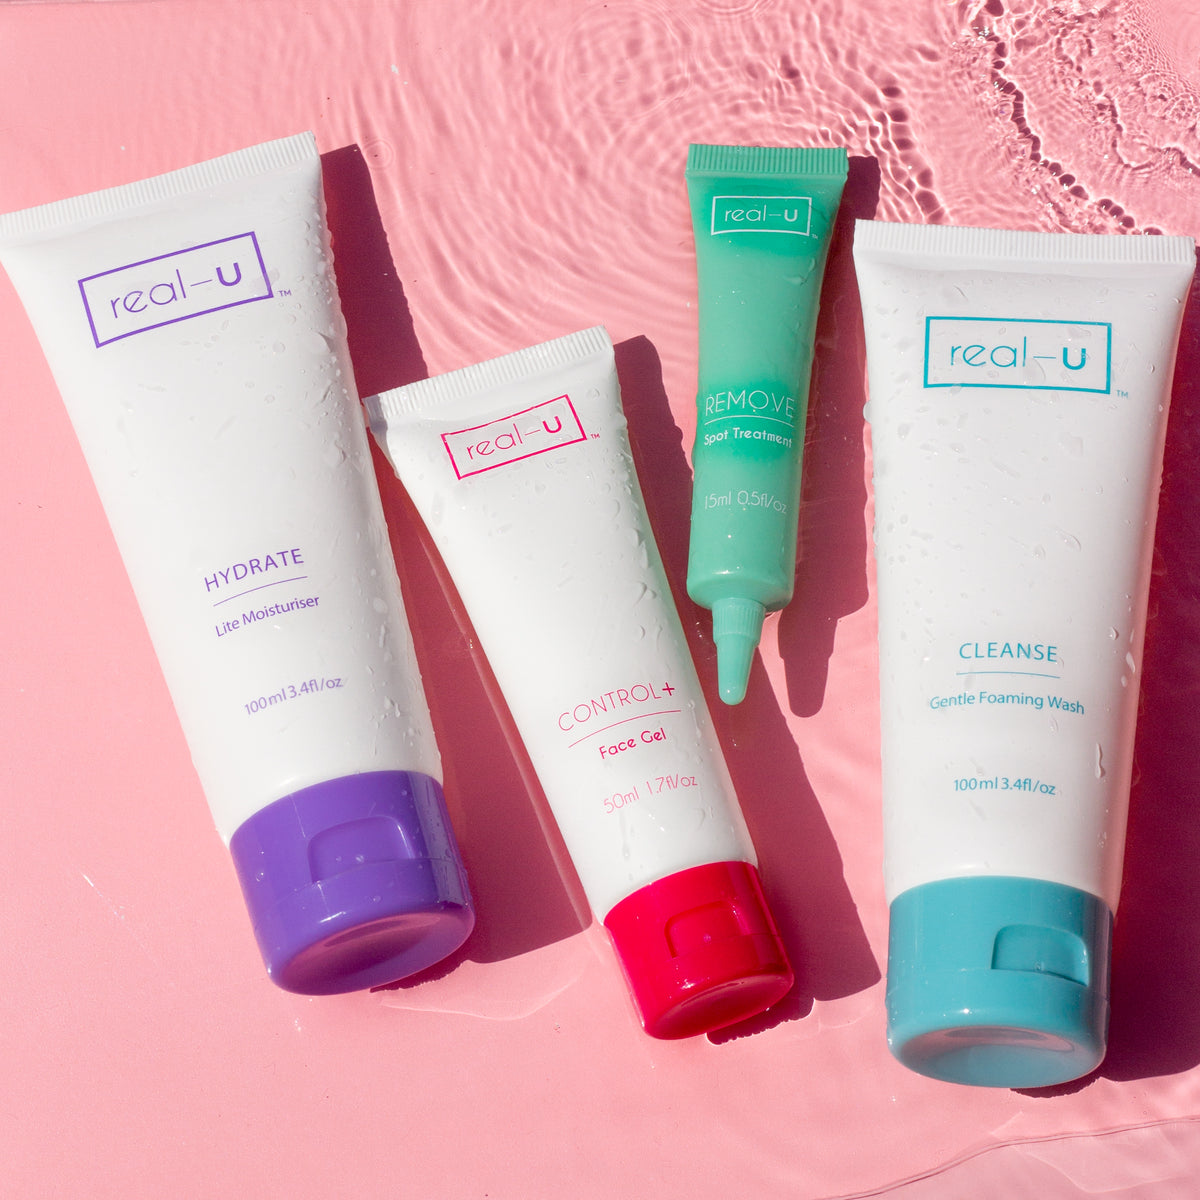 real-u red LUXE+ Kit clears acne, pimples and breakouts